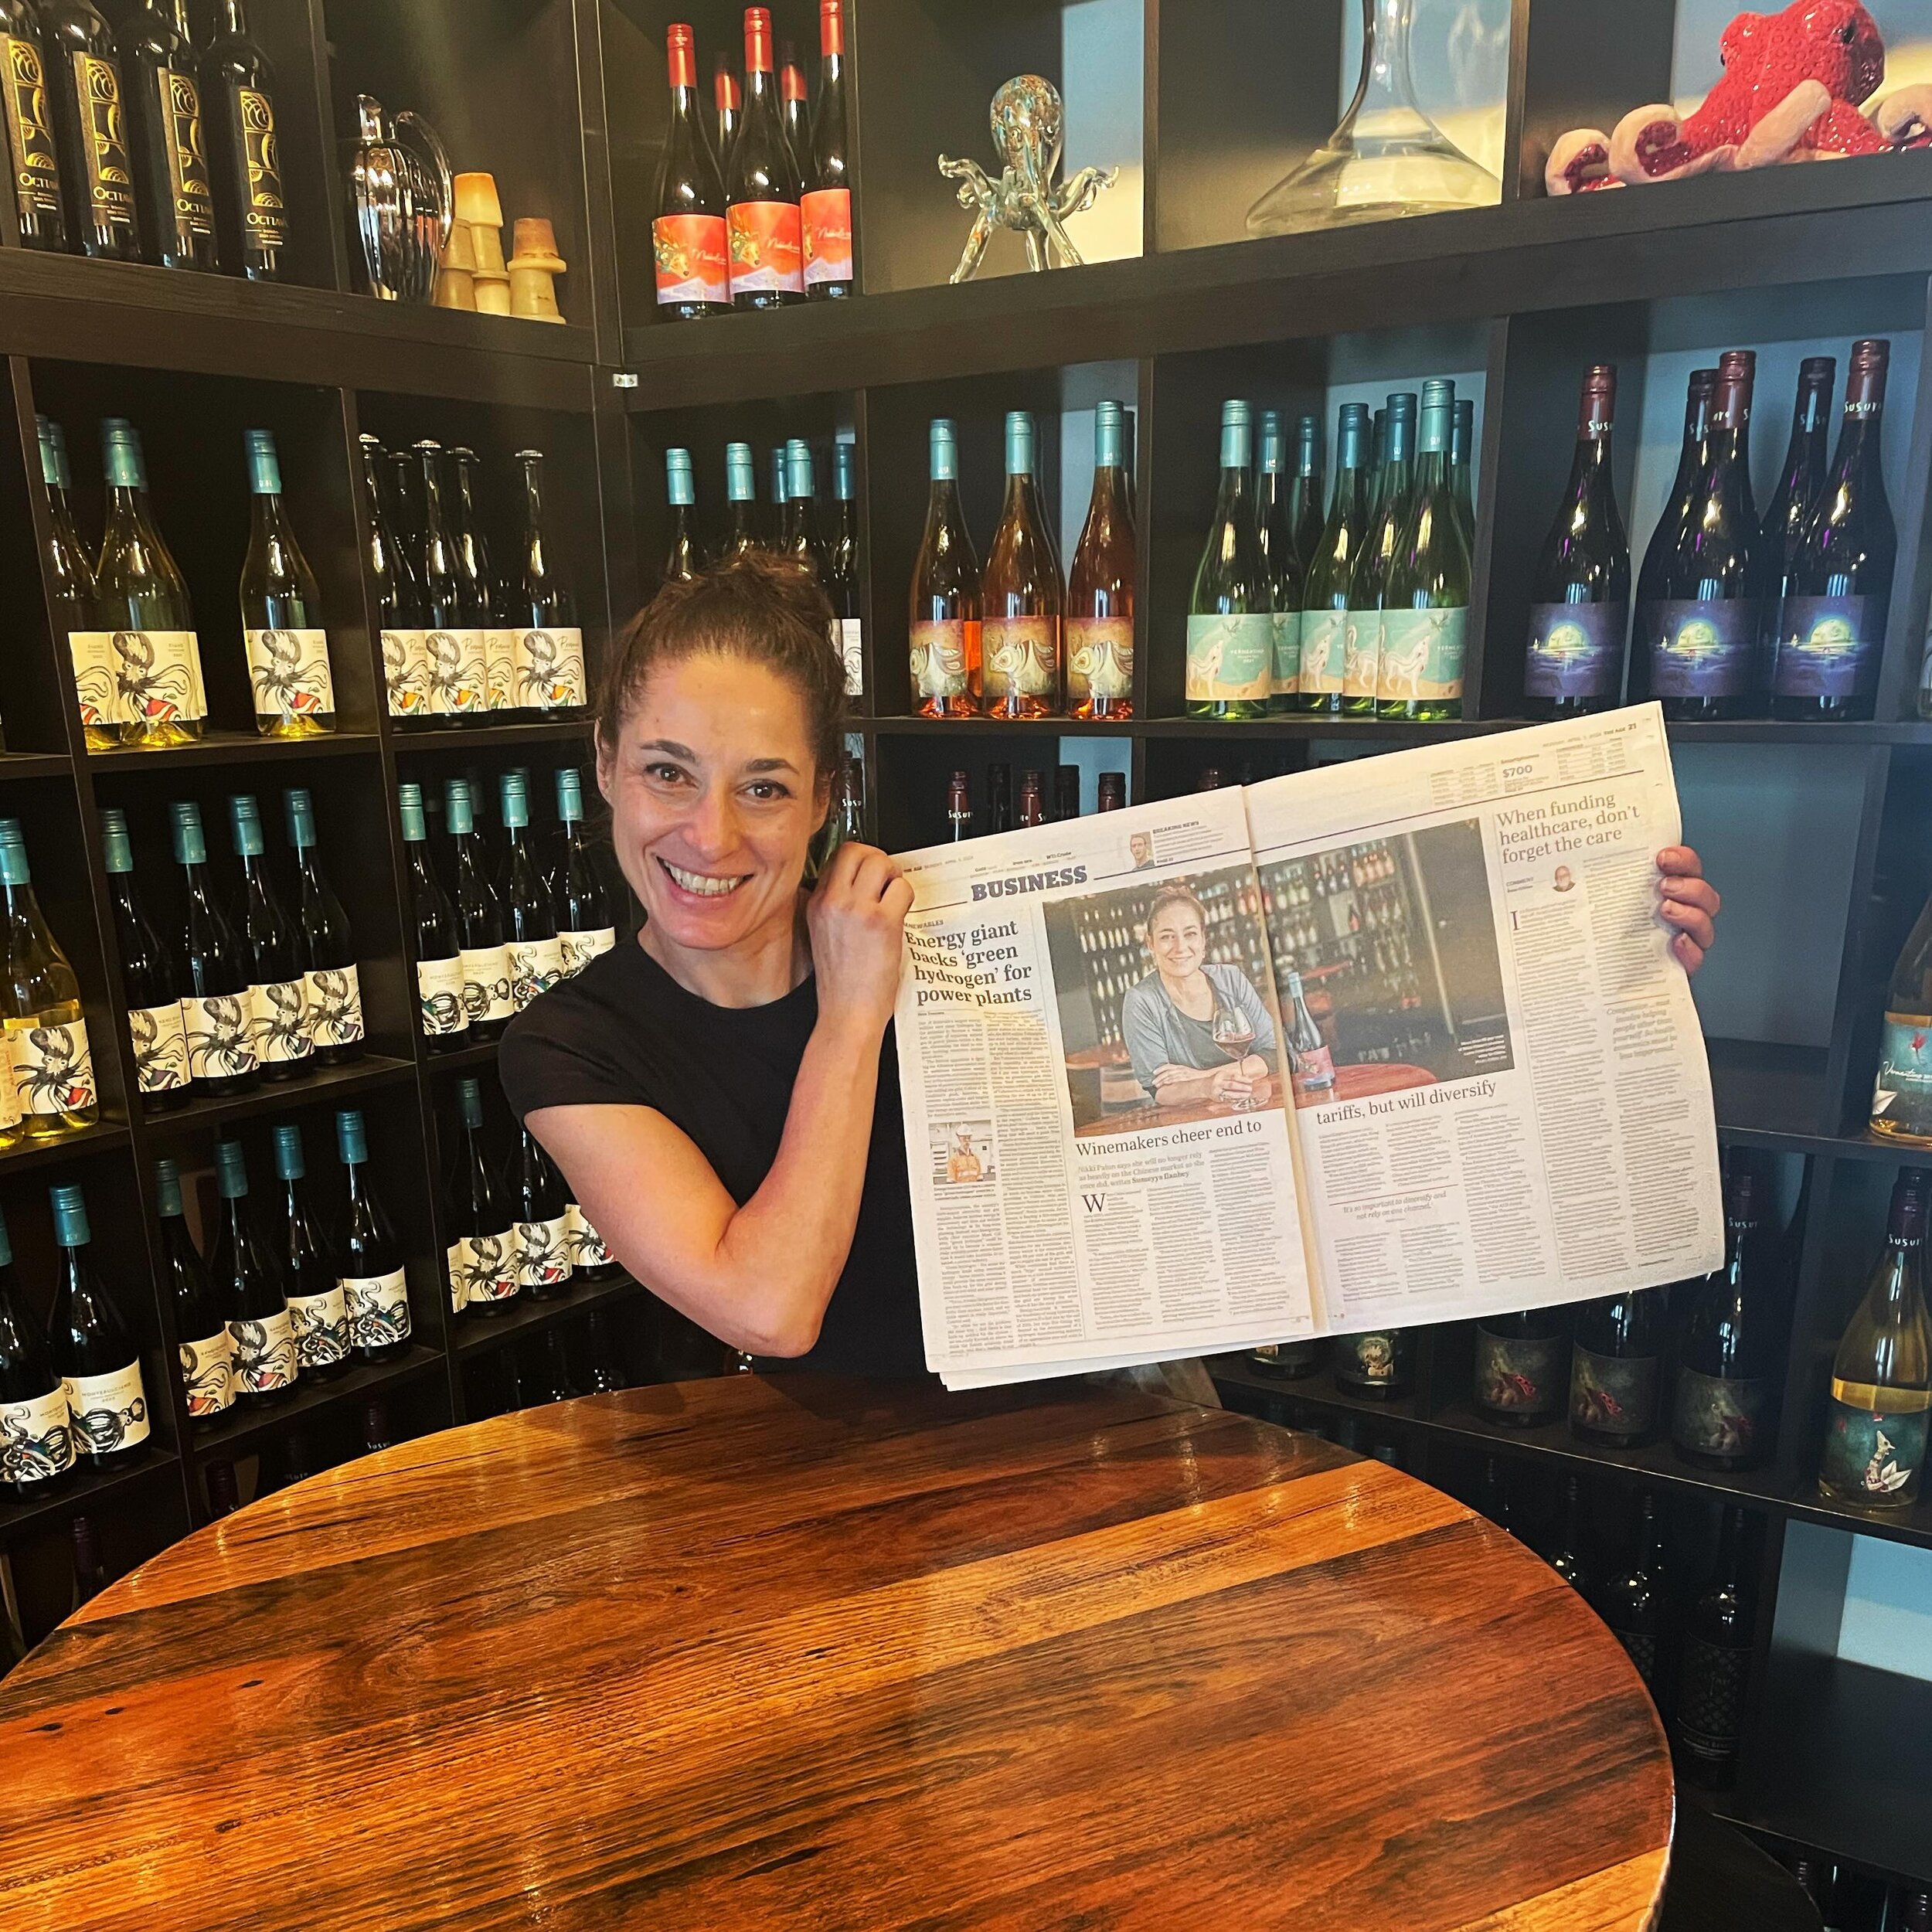 Look who I found in The Age business section today! 🤩🤩

#theage #wine #susuro #wineexport #soexcited #winebusiness #newspaper